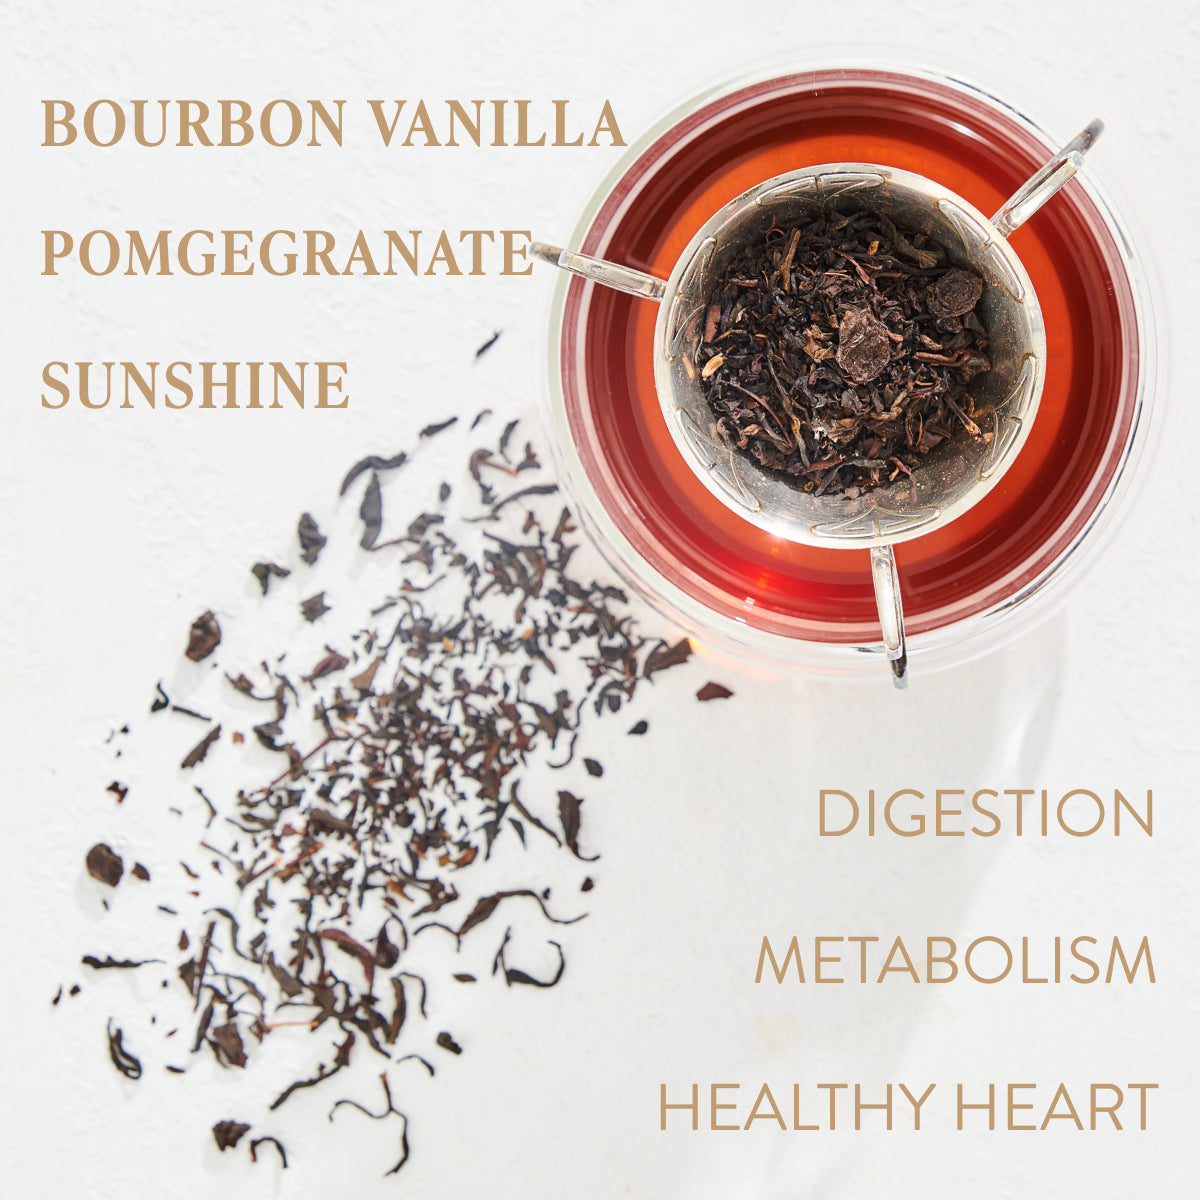 A cup of tea with loose leaves scattered around it. The text reads &quot;Bohemian Breakfast Black Tea- Probiotic Rich Vanilla Puerh Tea for Digestion &amp; Energy.&quot; Benefits listed: &quot;Digestion, Metabolism, Healthy Heart.&quot; The tea seems to contain bourbon vanilla and pomegranate, making it a delightful coffee alternative with potential health benefits from Magic Hour.